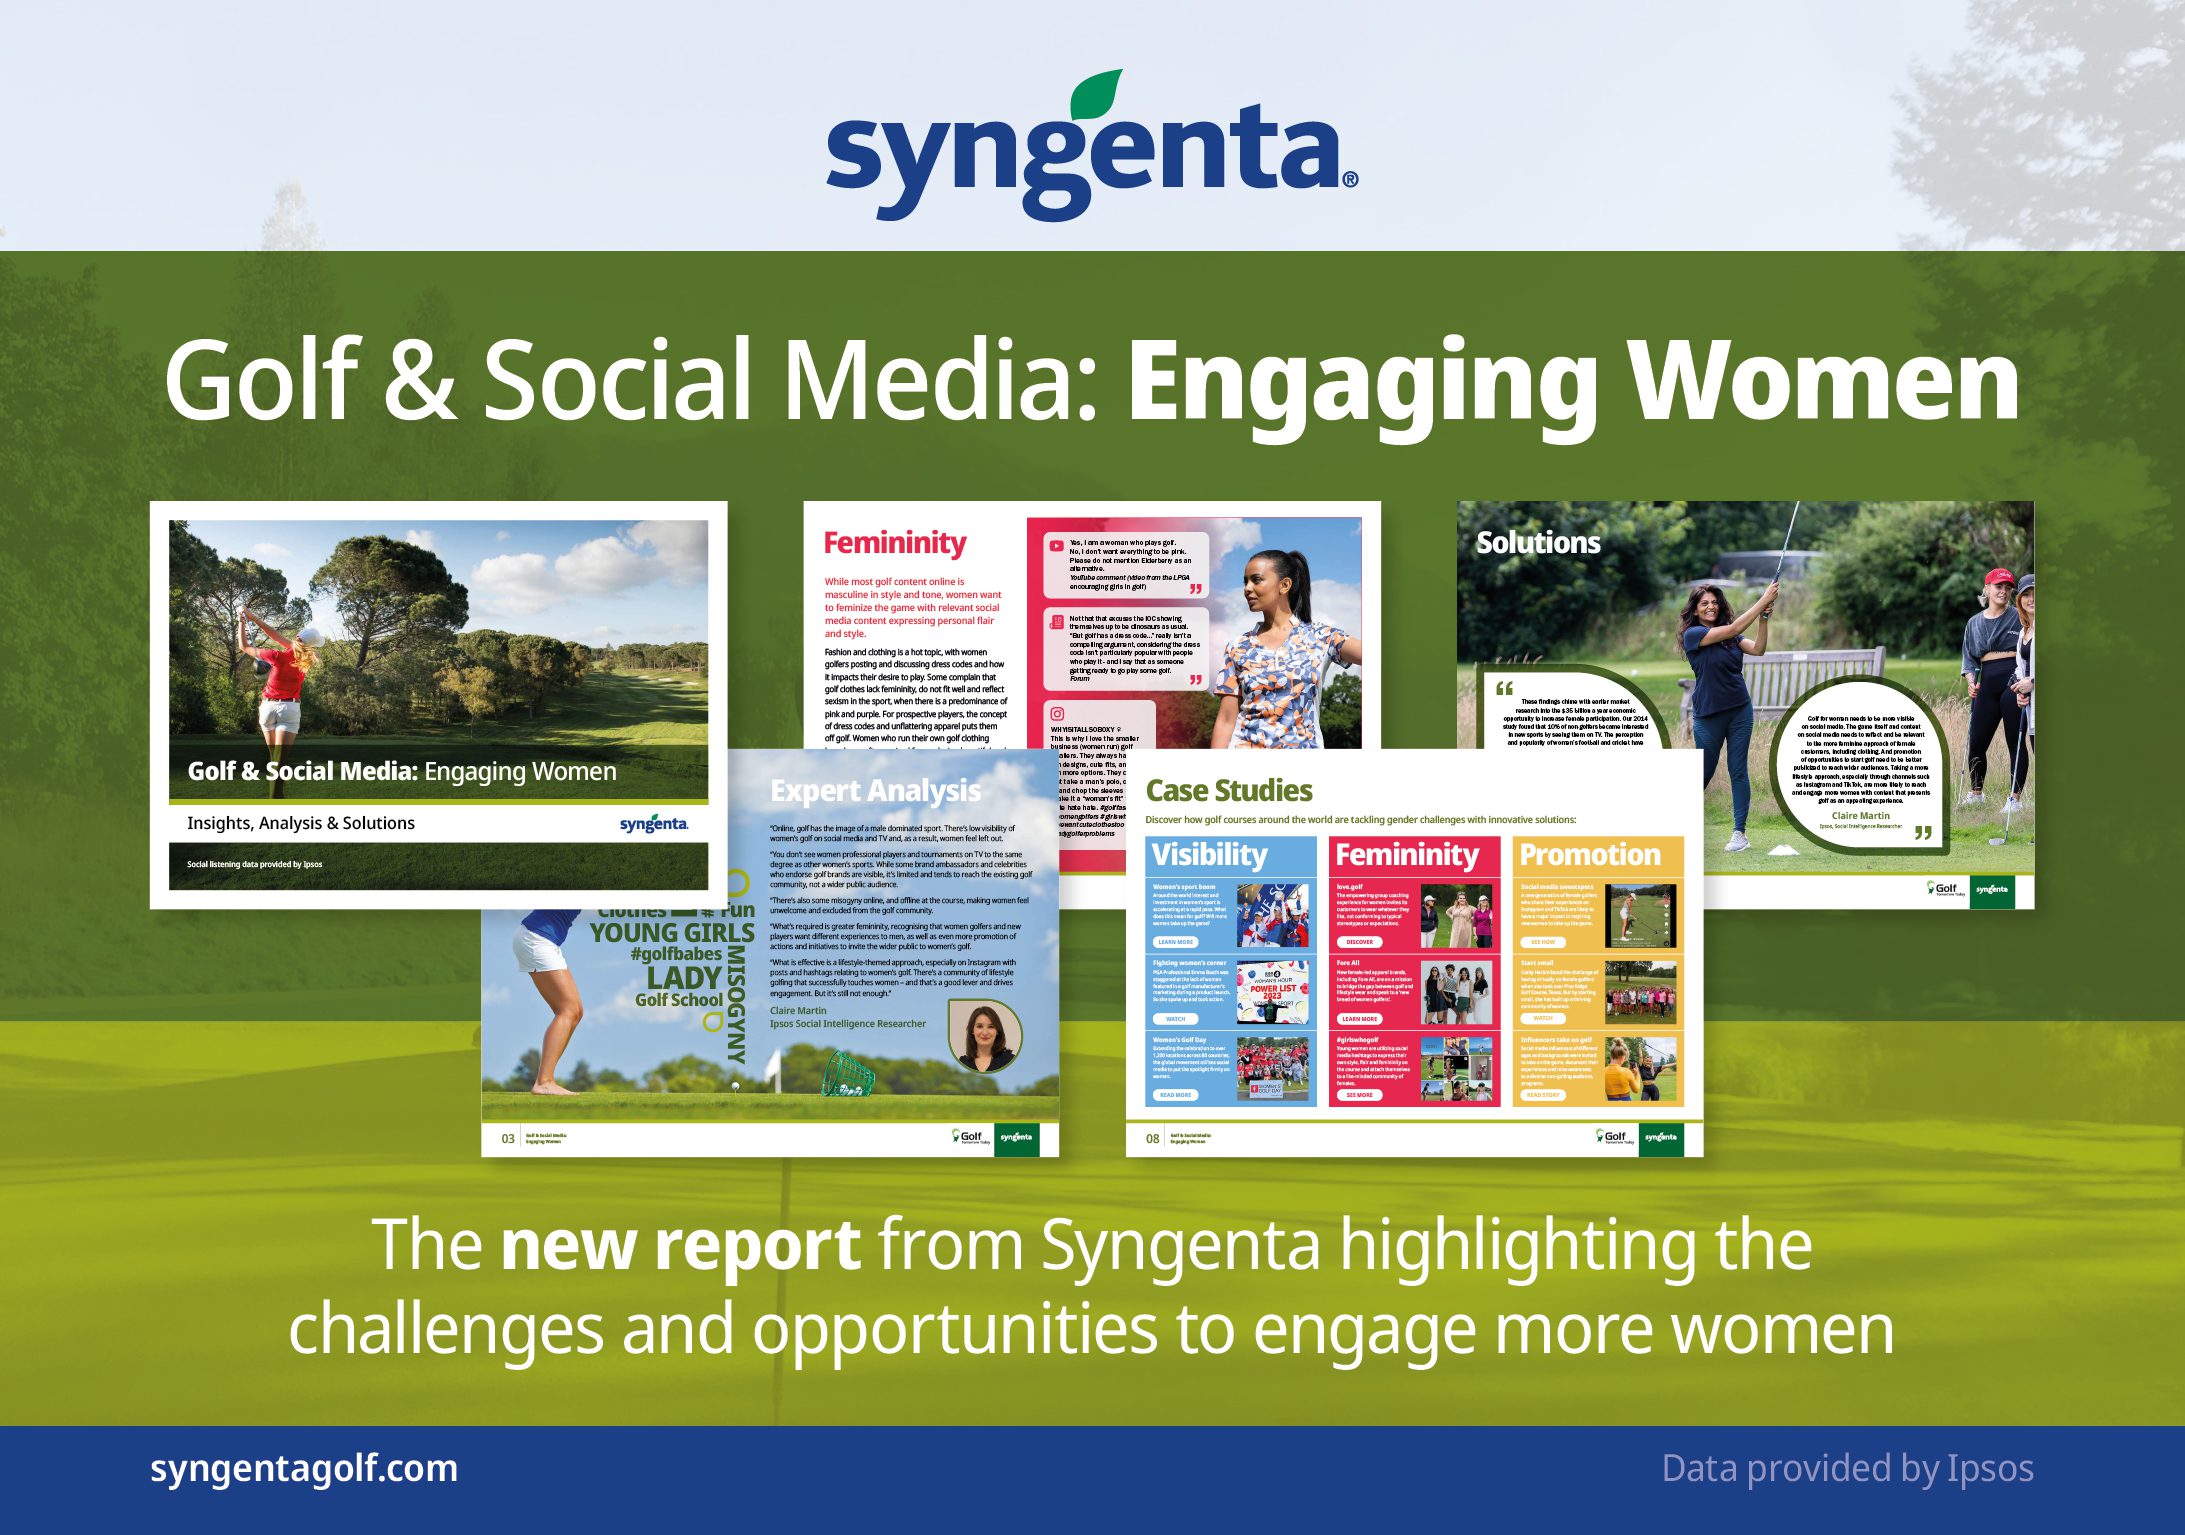 Syngenta Social Listening: TV and Instagram the Way to attract Women Golfers